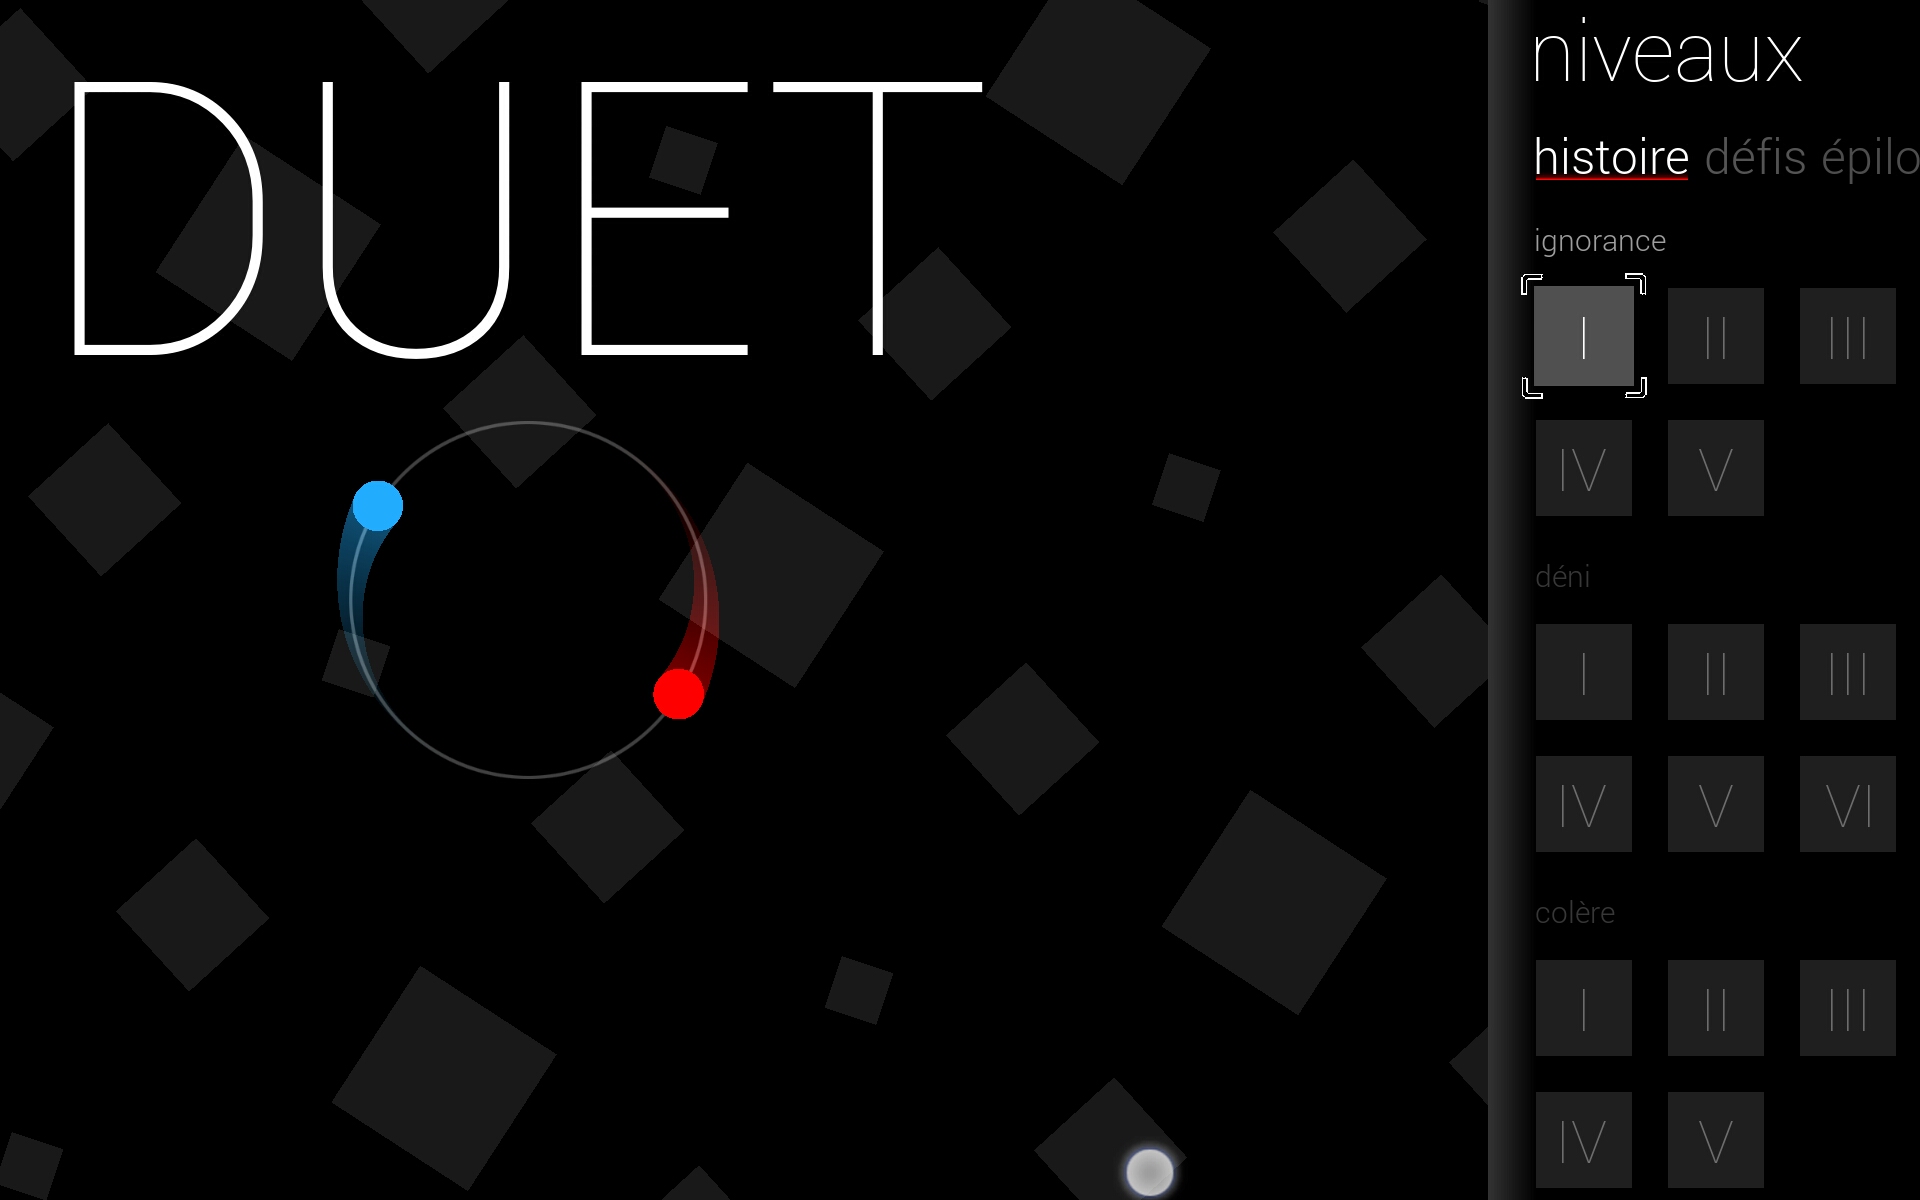 Duet title screen shows level selection to its right when starting a new game.